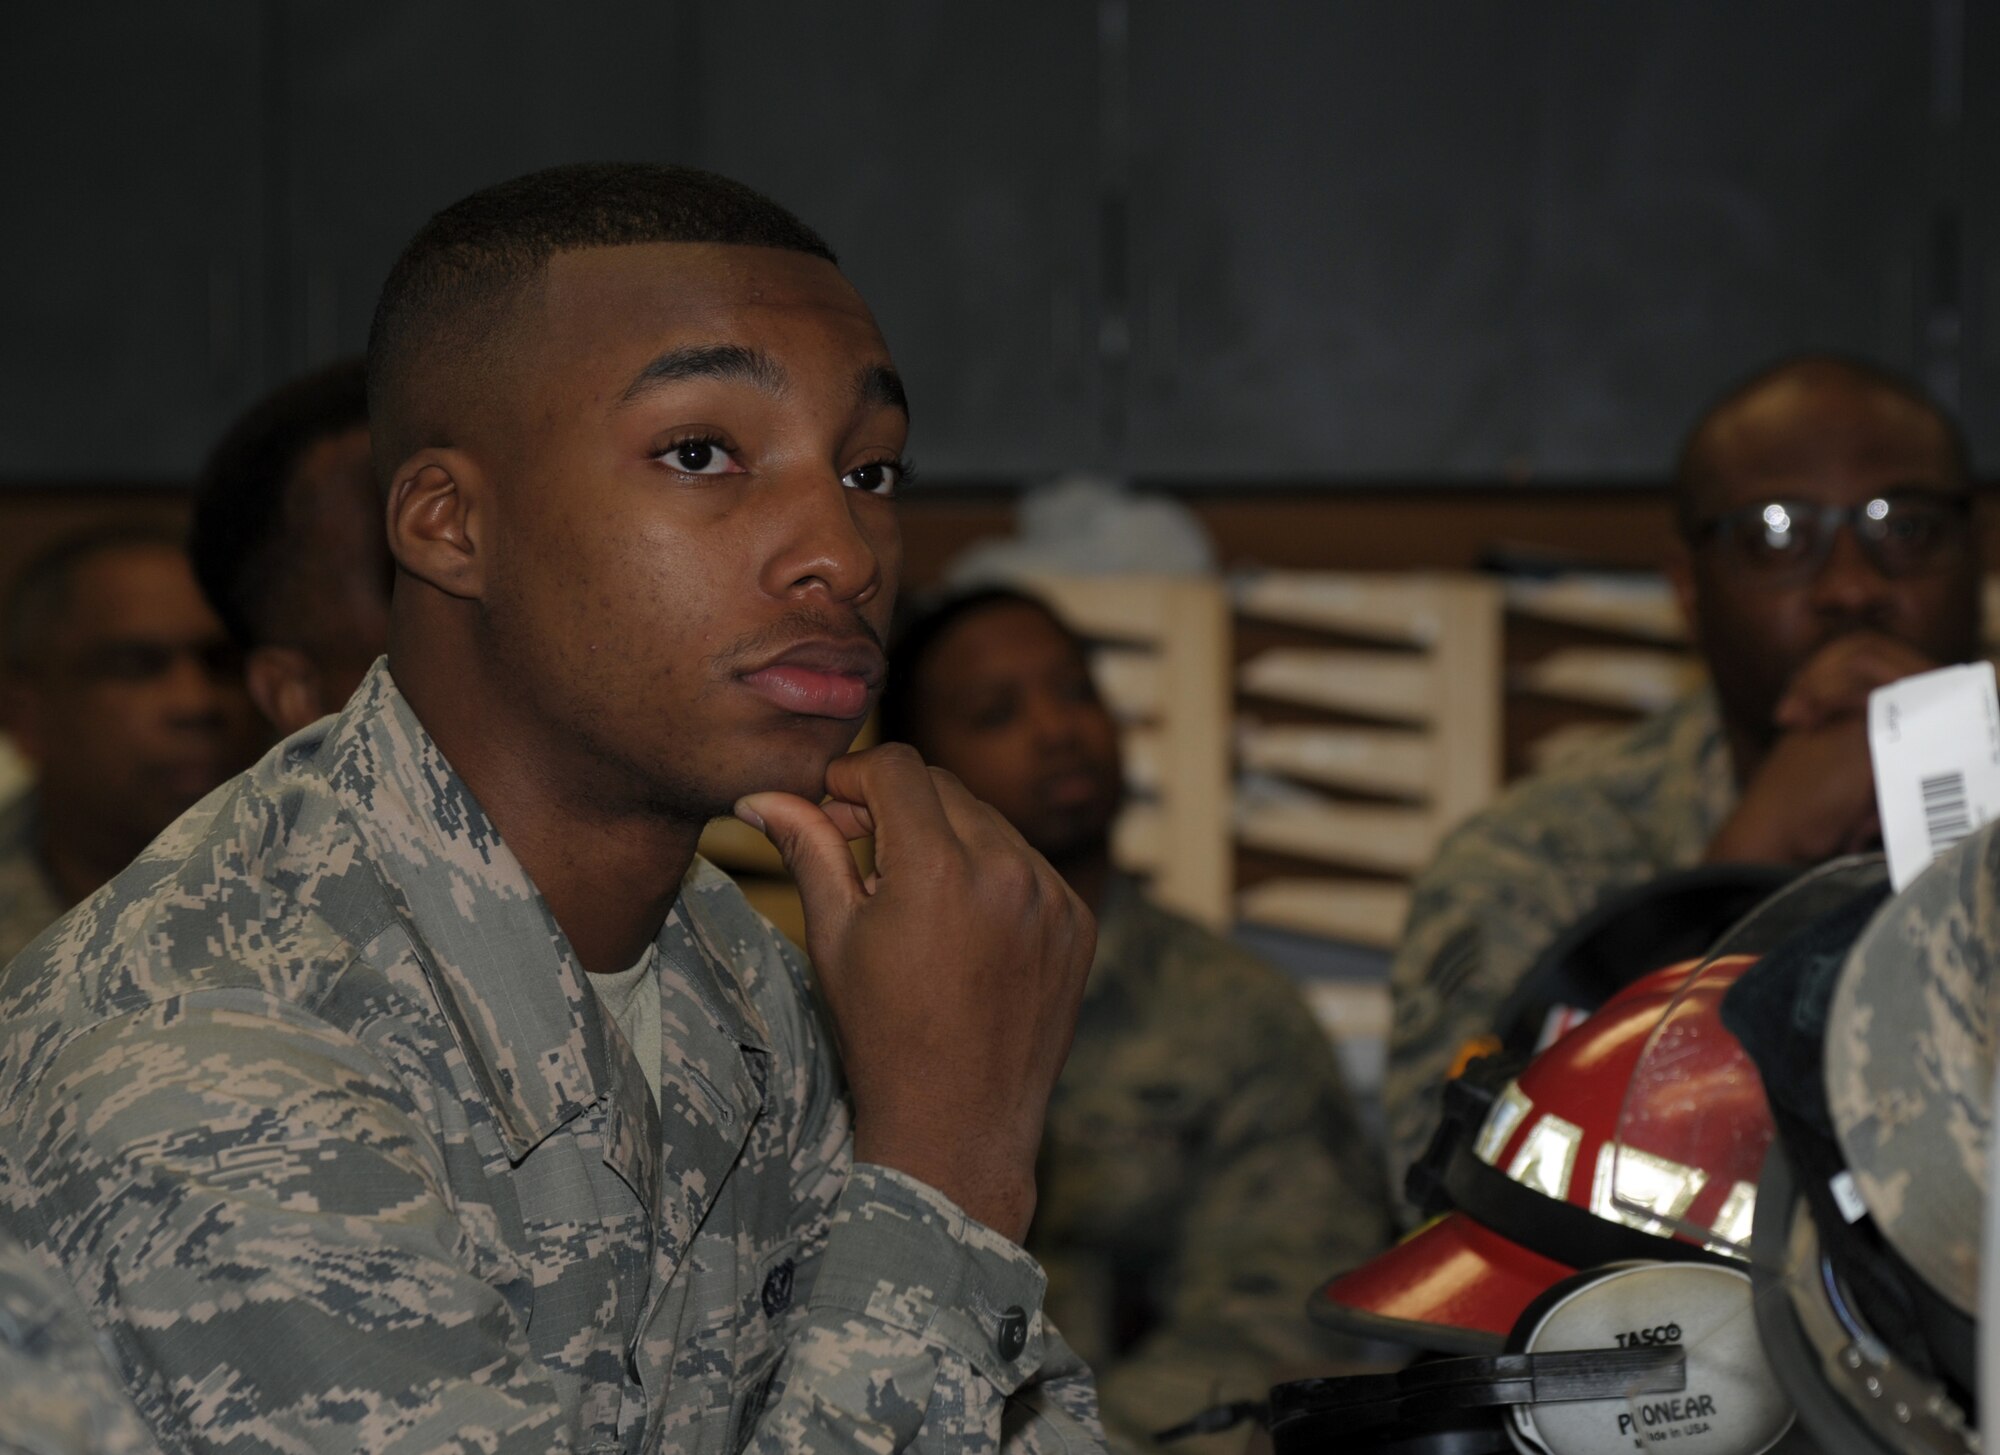 Airmen look and listen to instructor during firefighter safety briefing